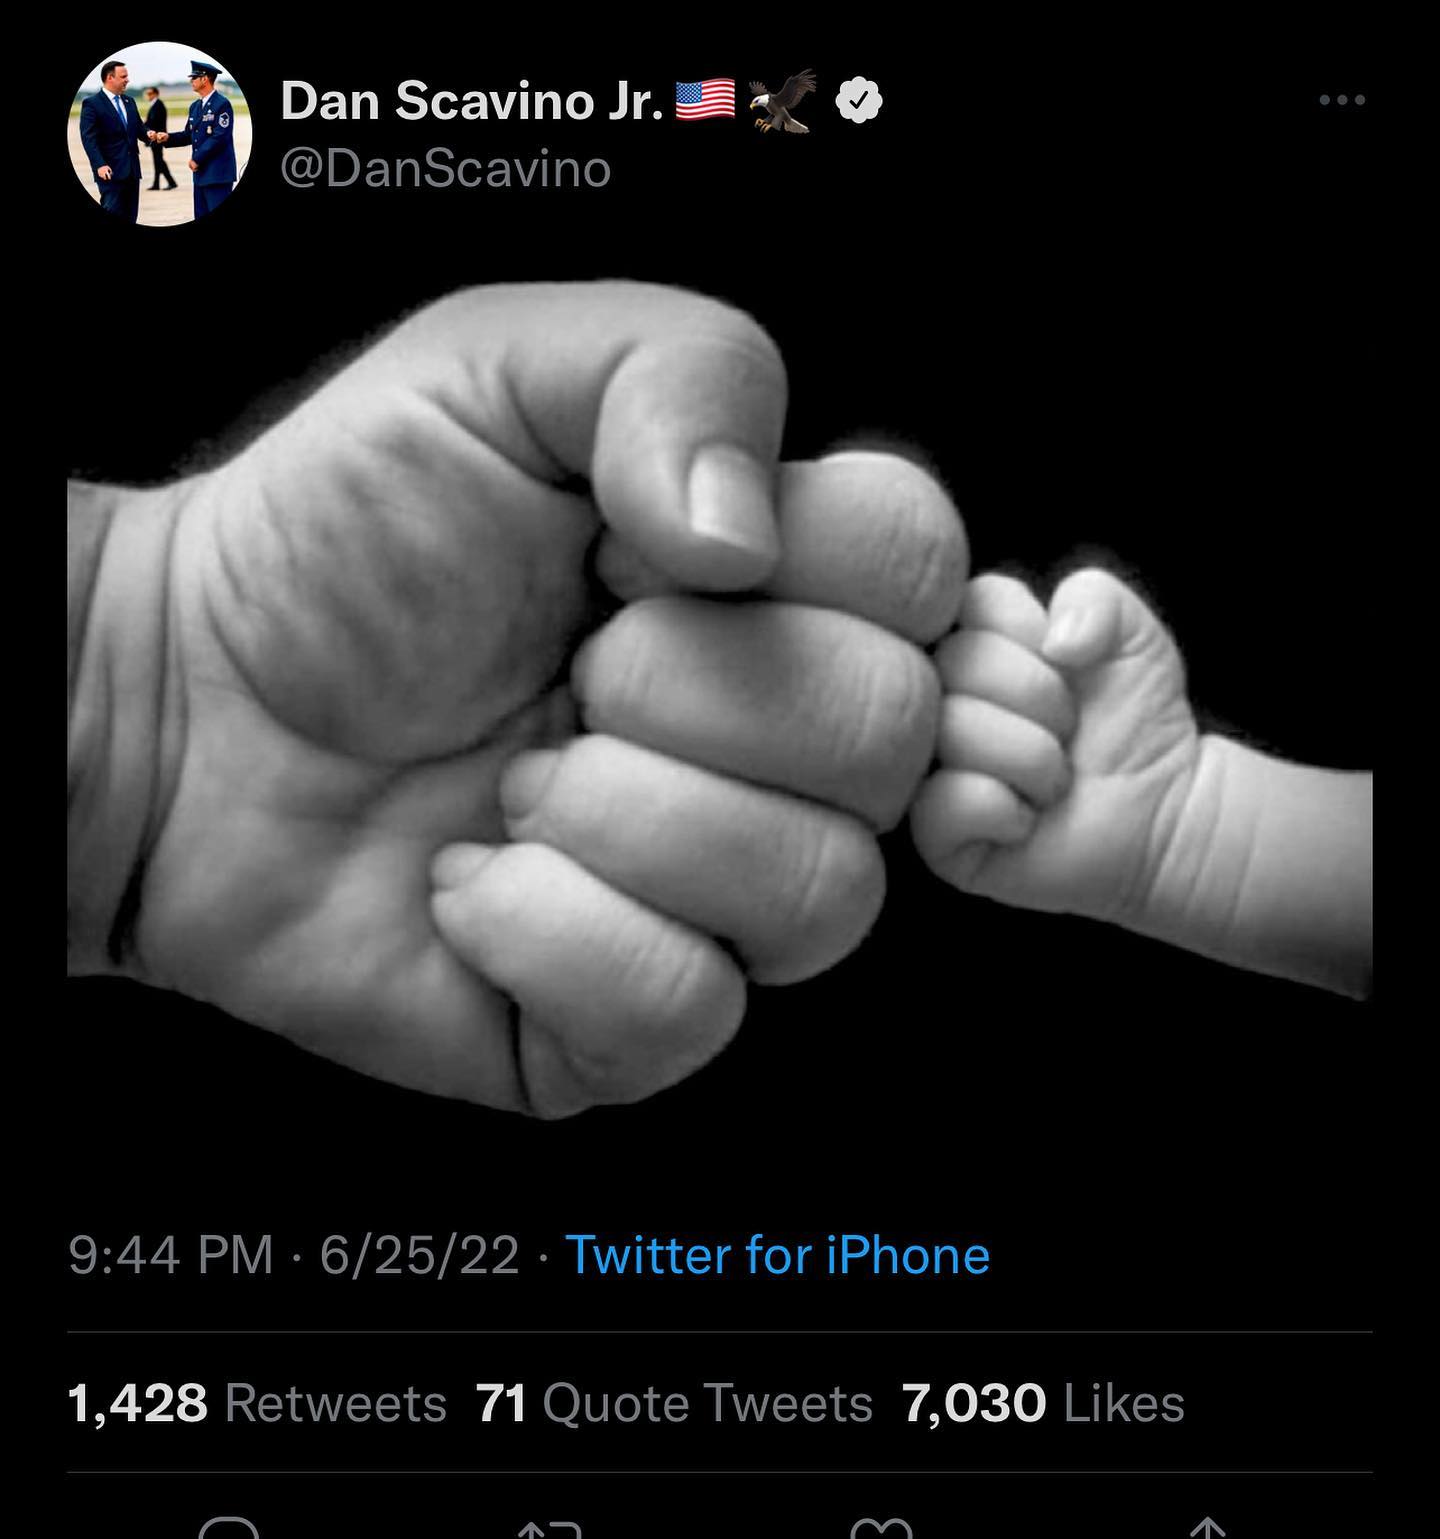 You are currently viewing So  posts this at 10:44 and Q posts about roe v wade at 10:55 haha Dan is Q